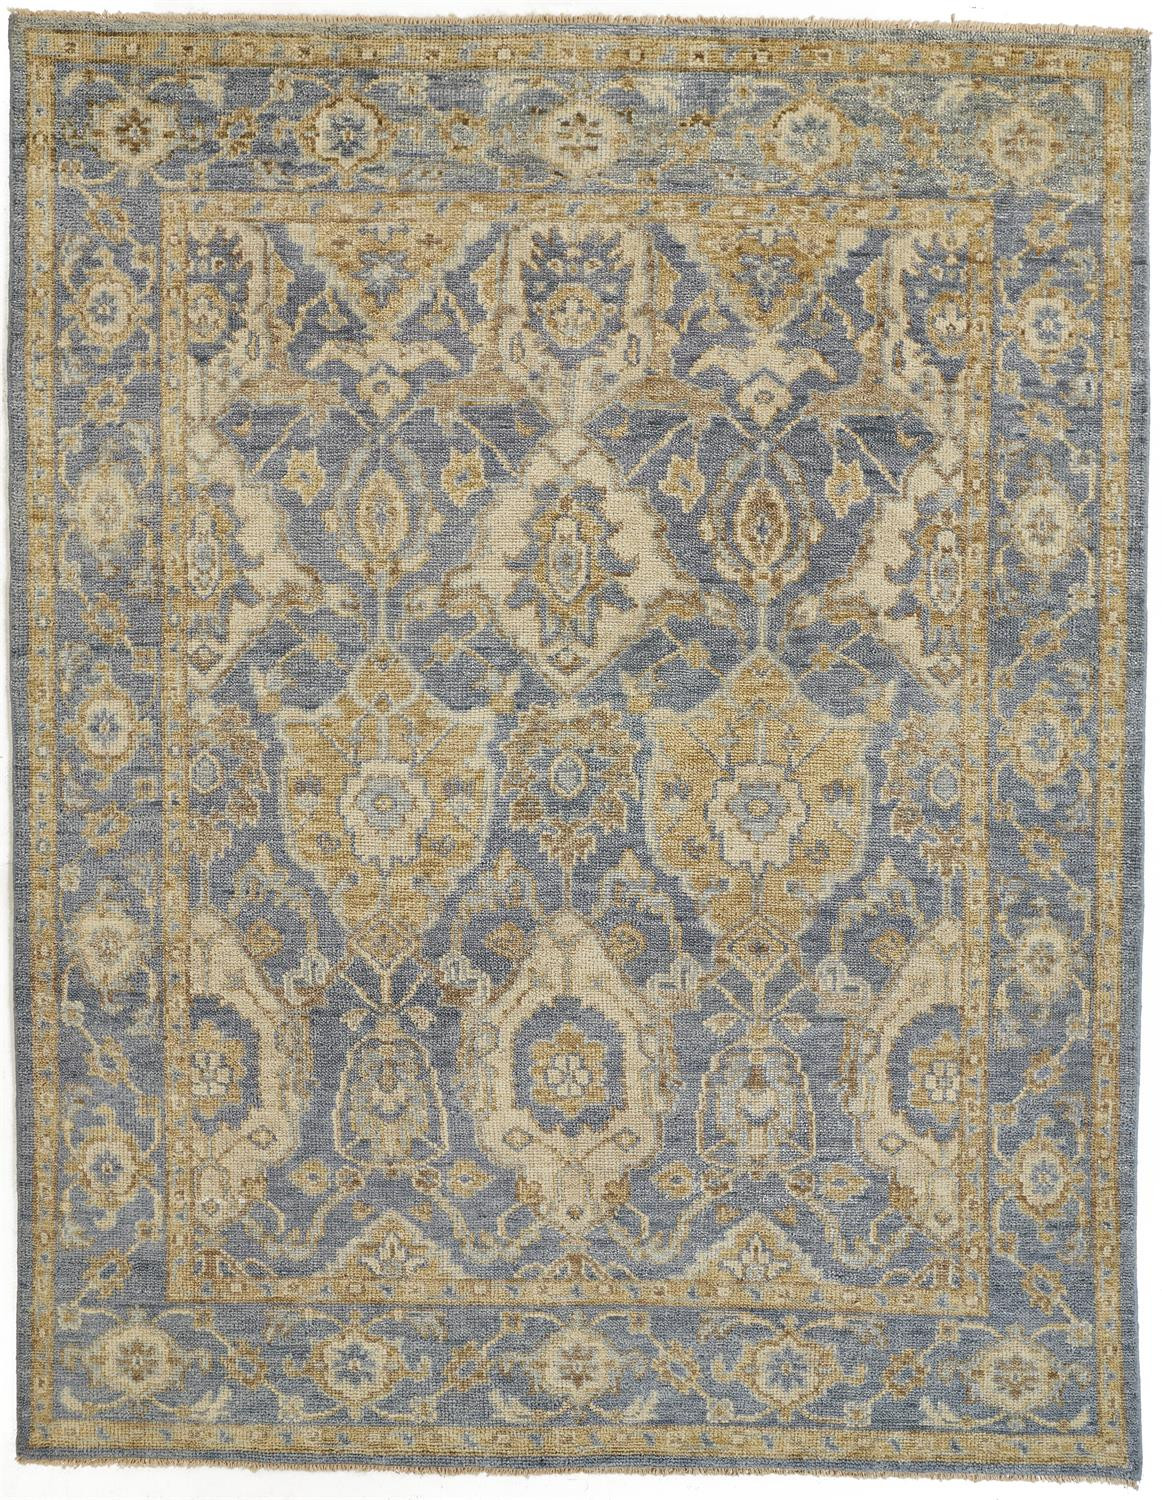 12' X 15' Blue Gold And Tan Wool Floral Hand Knotted Stain Resistant Area Rug With Fringe-512618-1